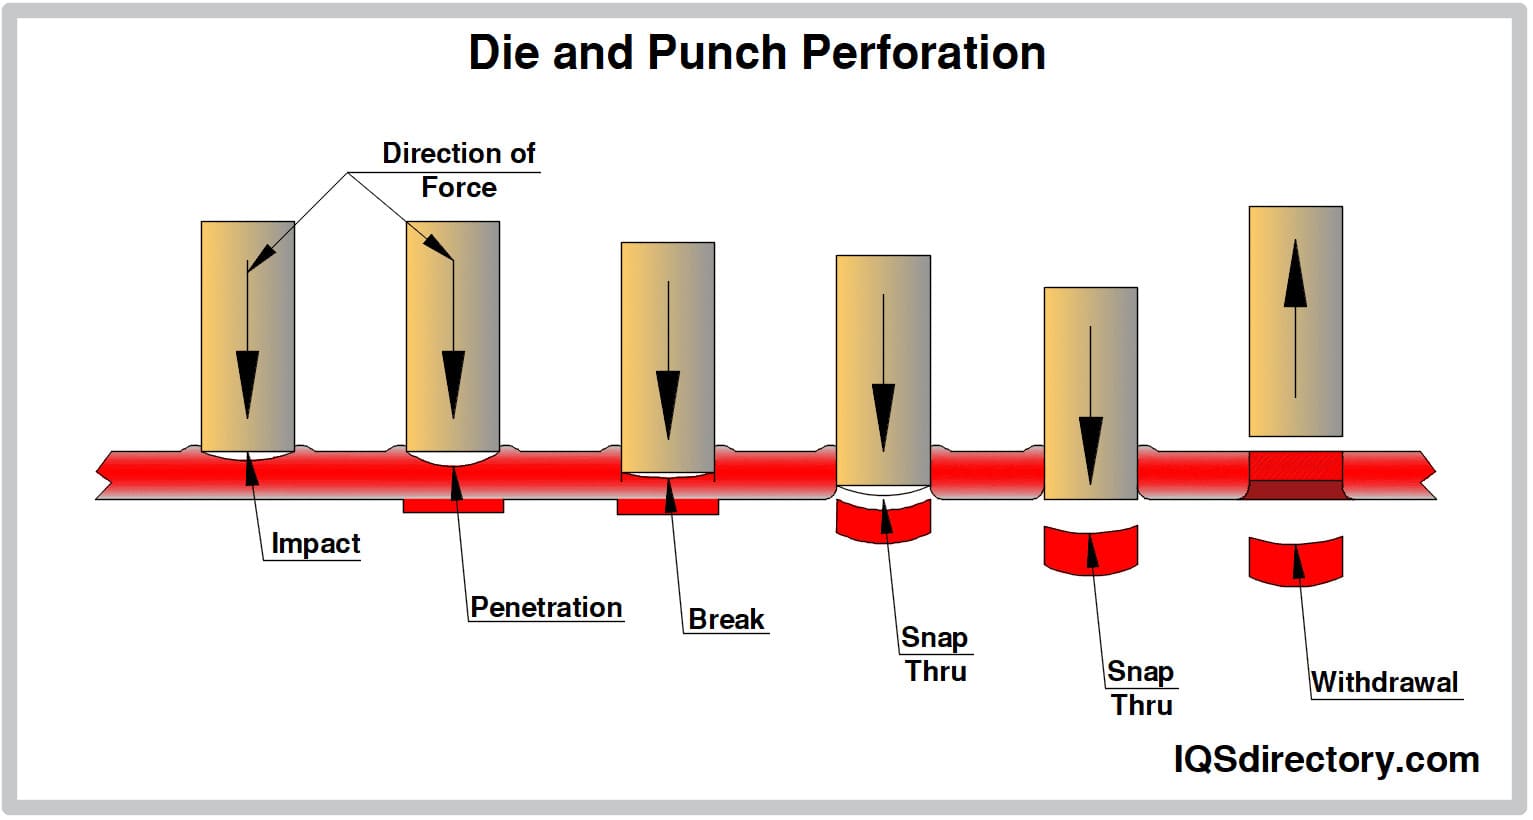 Die and Punch Perforation